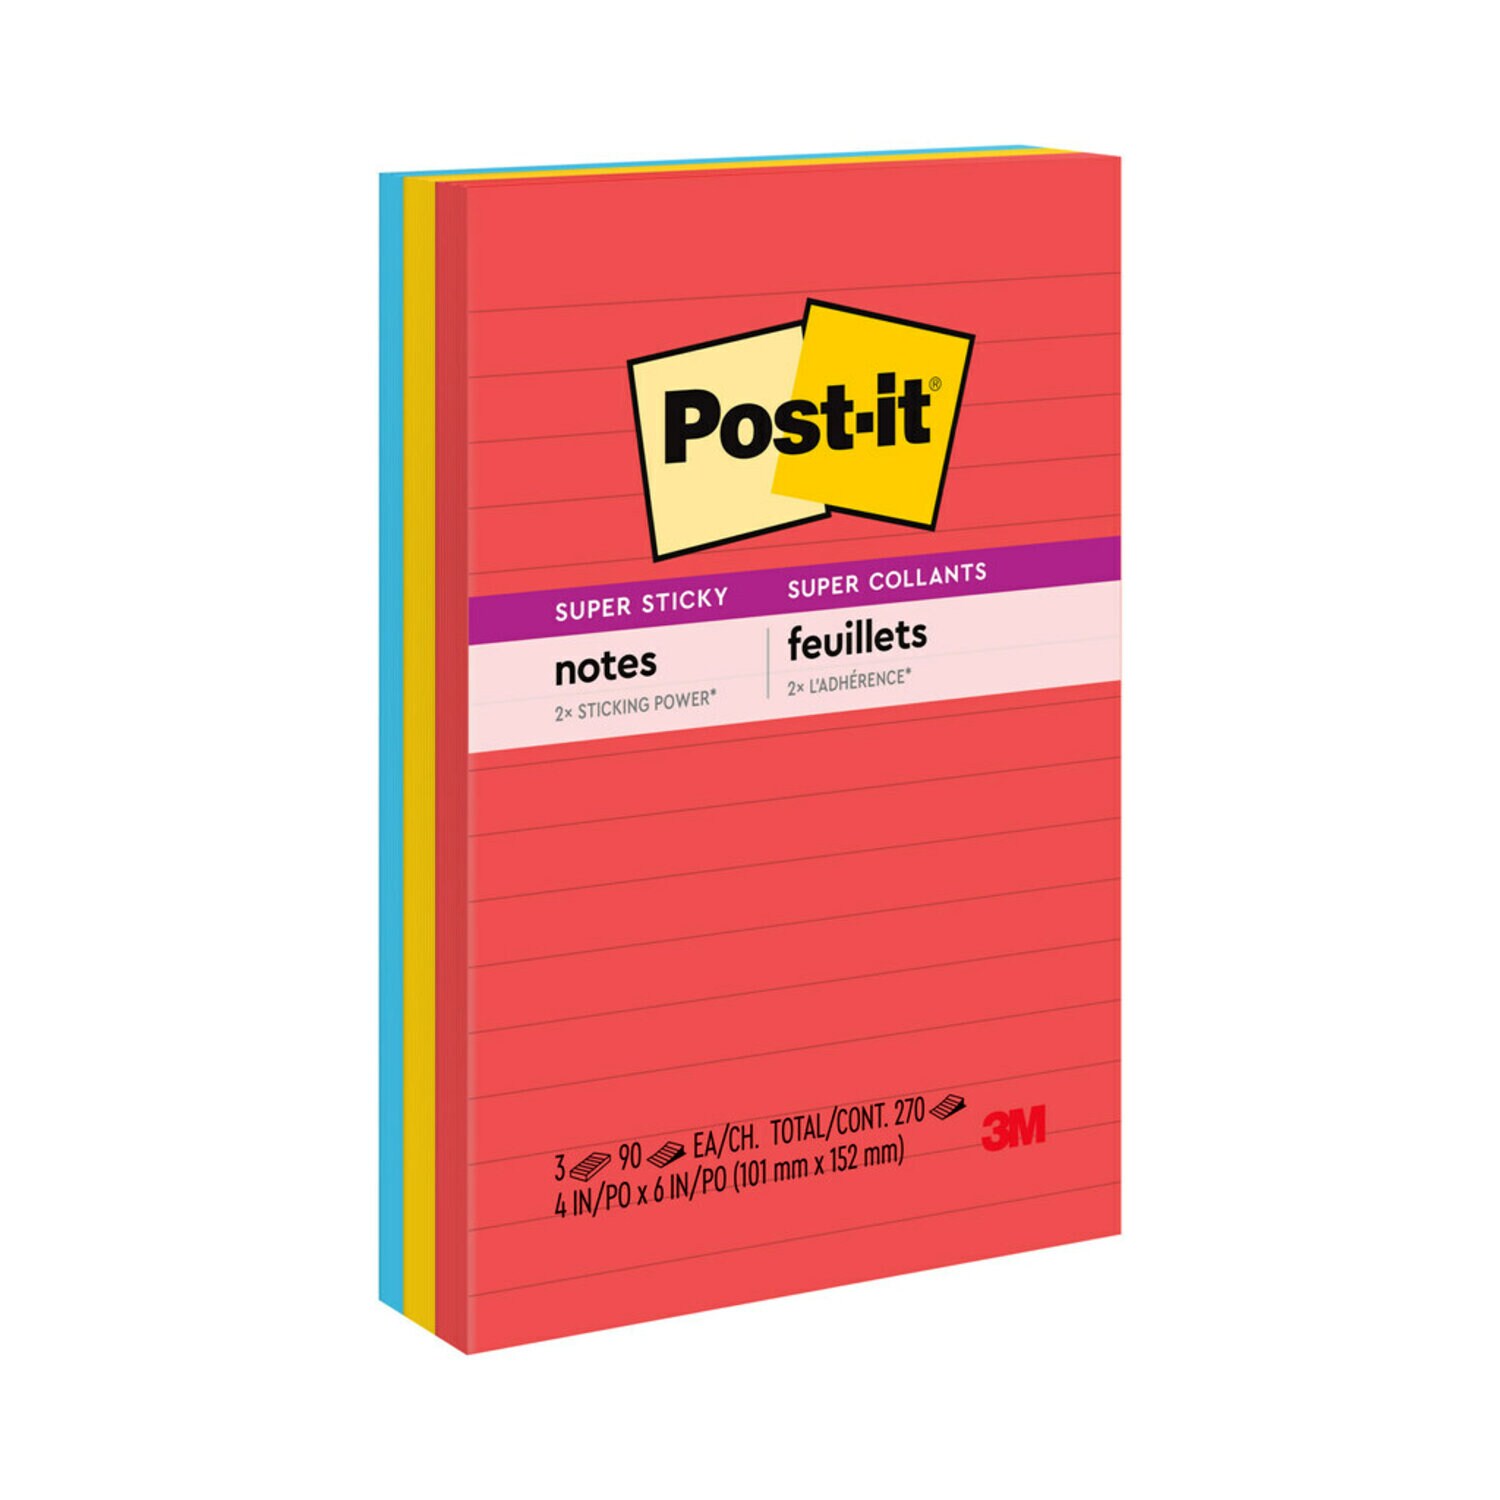 7010332775 - Post-it Super Sticky Notes 660-3SSAN, 4 in x 6 in (101 mm x 152 mm), Playful Primaries Collection, Lined, 3 Pads/Pack